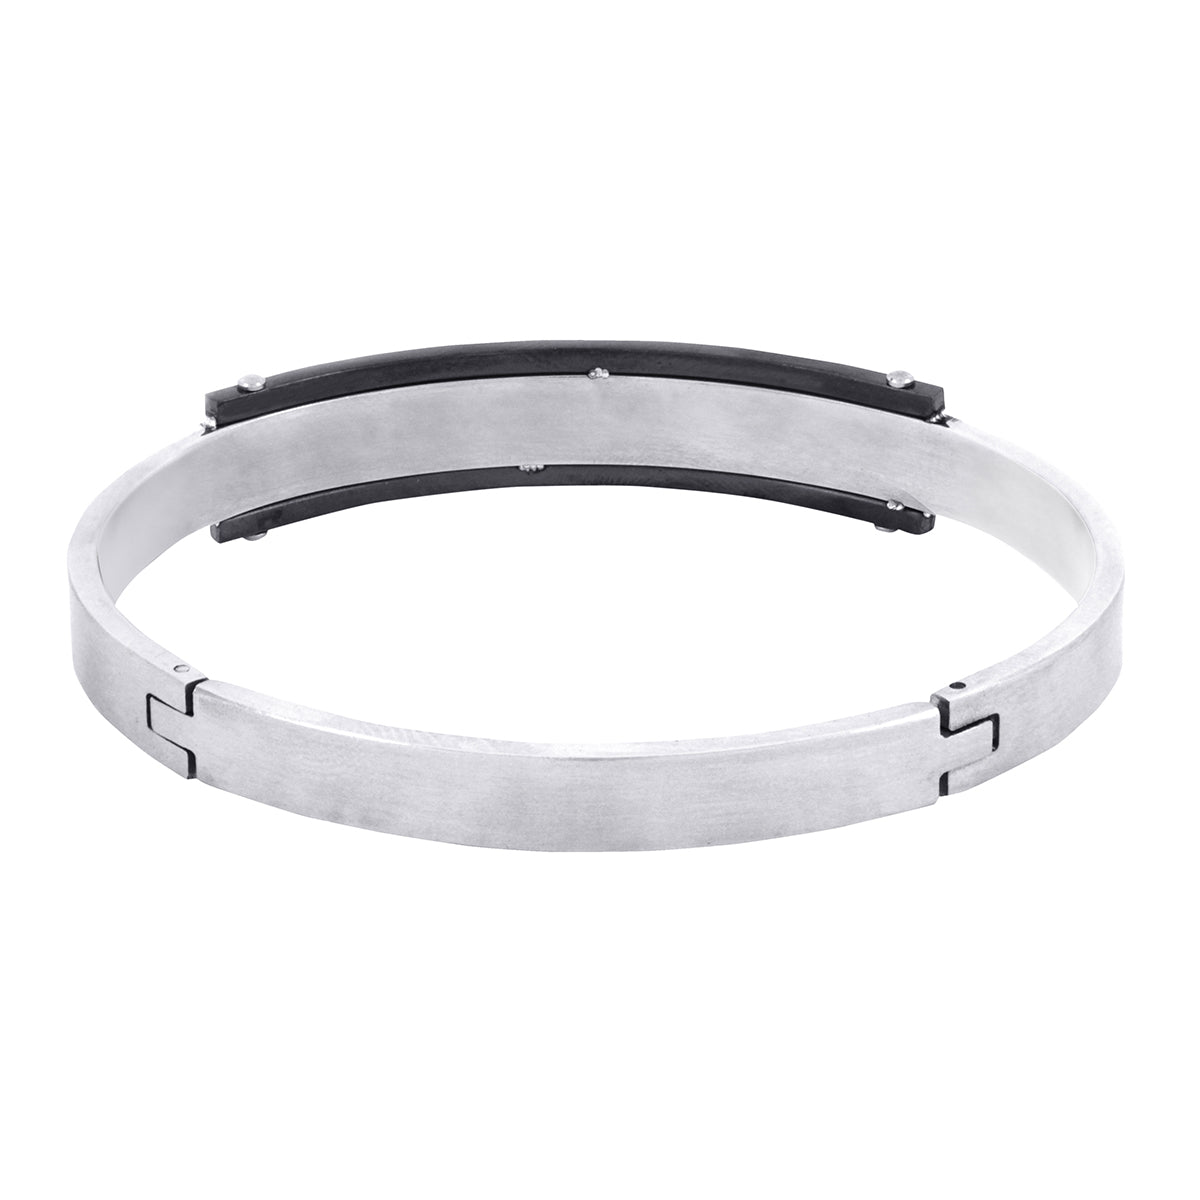 Wheat glossy silver plated 316l surgical stainless steel bracelet for boys  men  the jewelbox  2156956